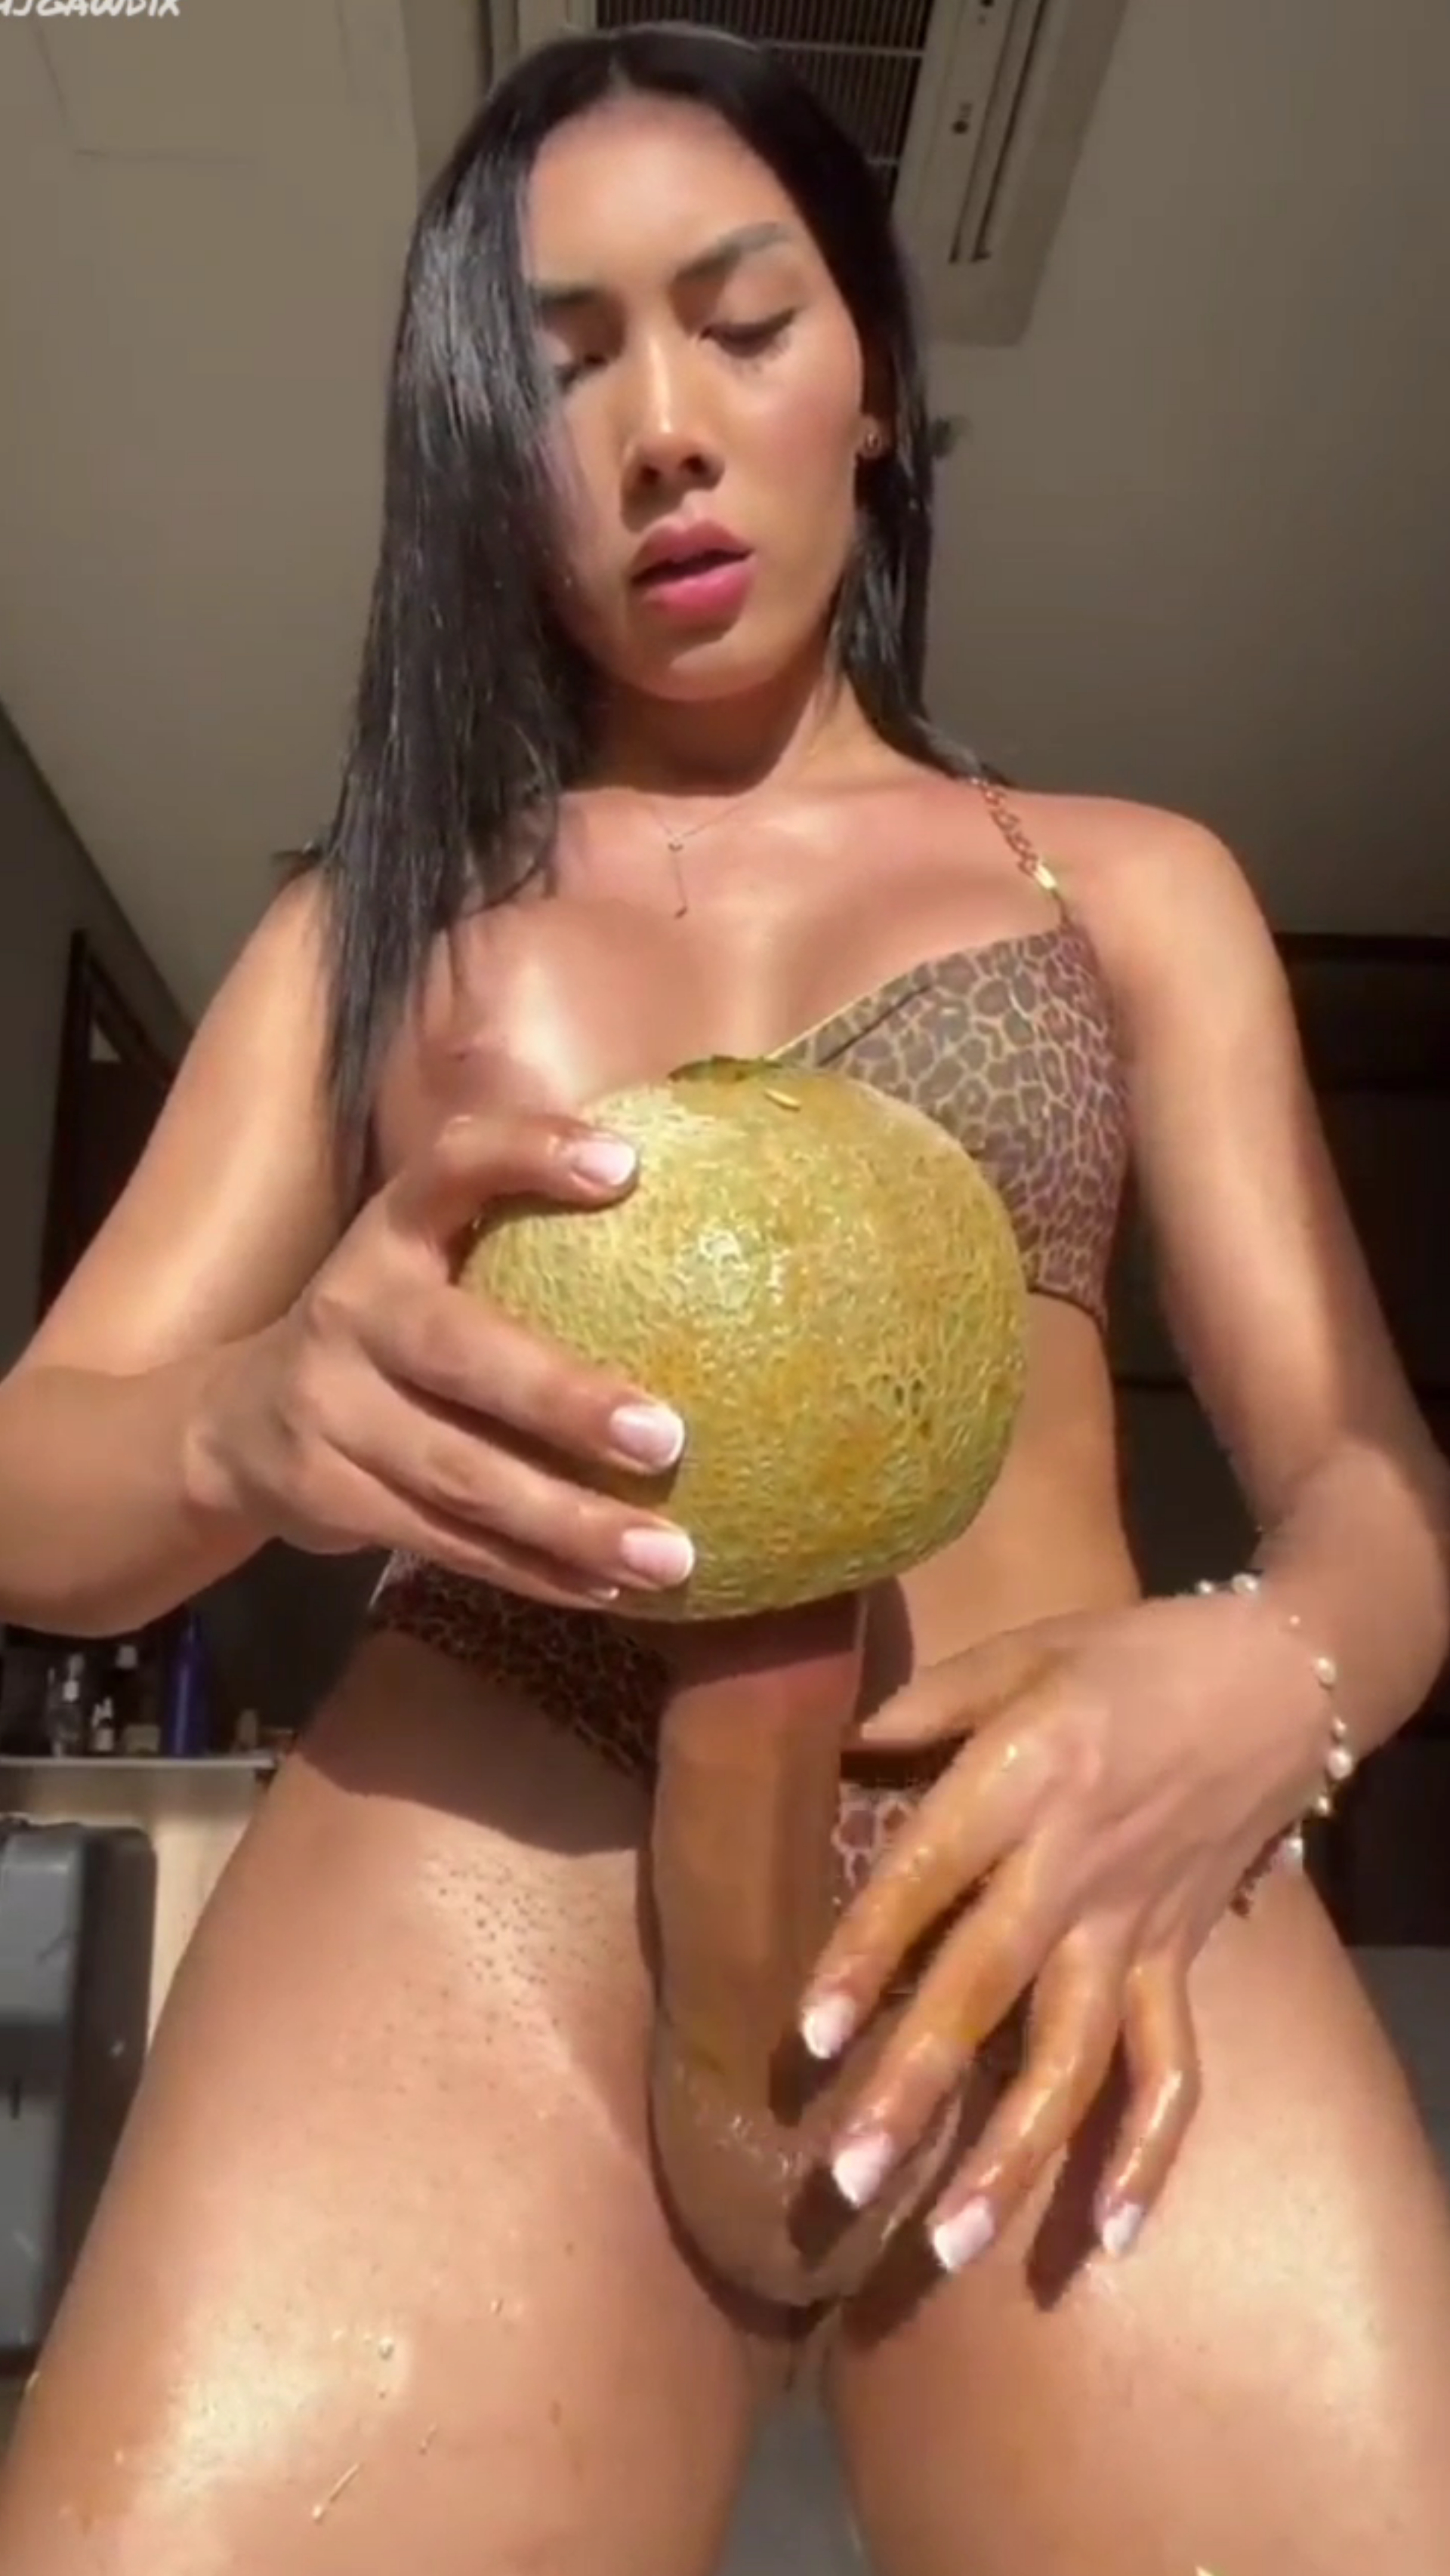 French Shemale Jerking - HOT ATTRACTIVE TS MODEL MASTURBATES WITH FRUITS - ThisVid.com